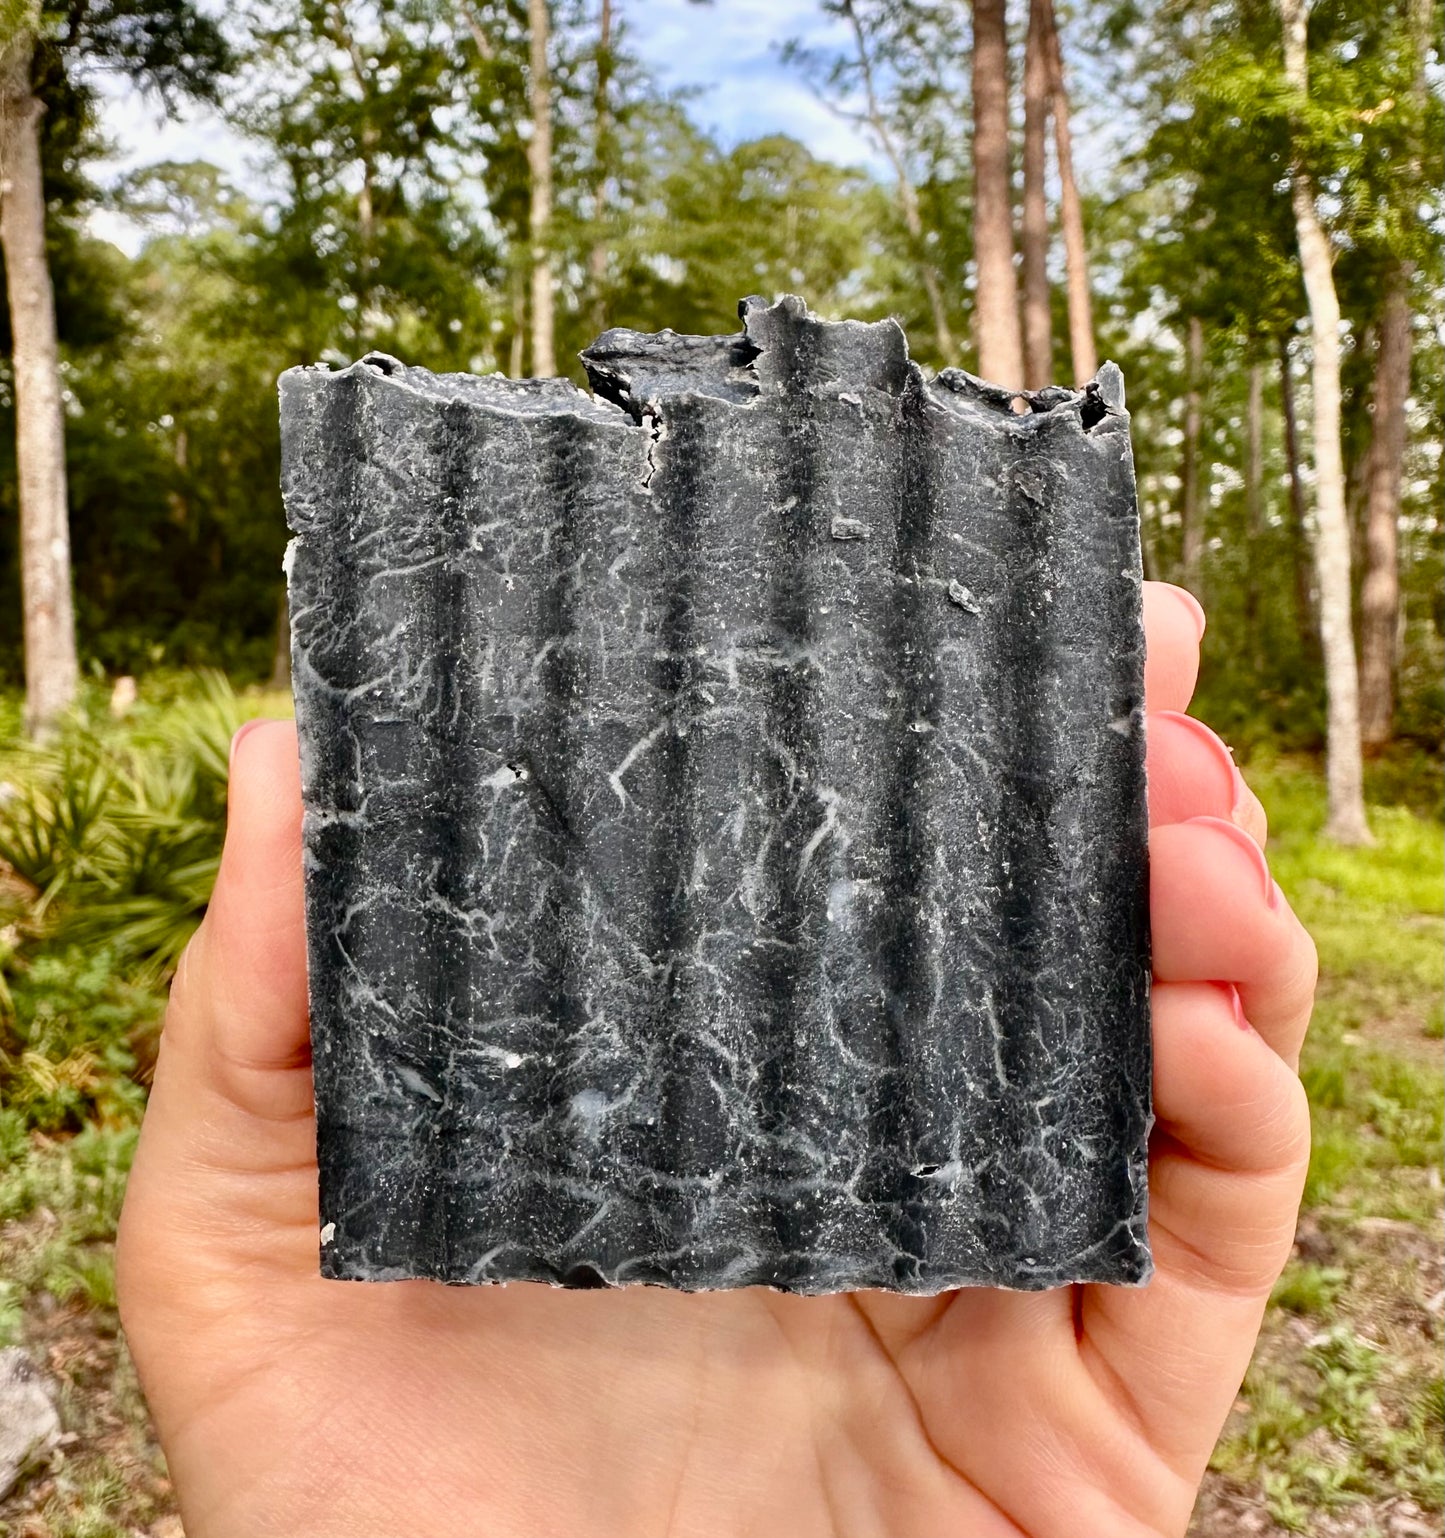 Activated Charcoal + Tea Tree